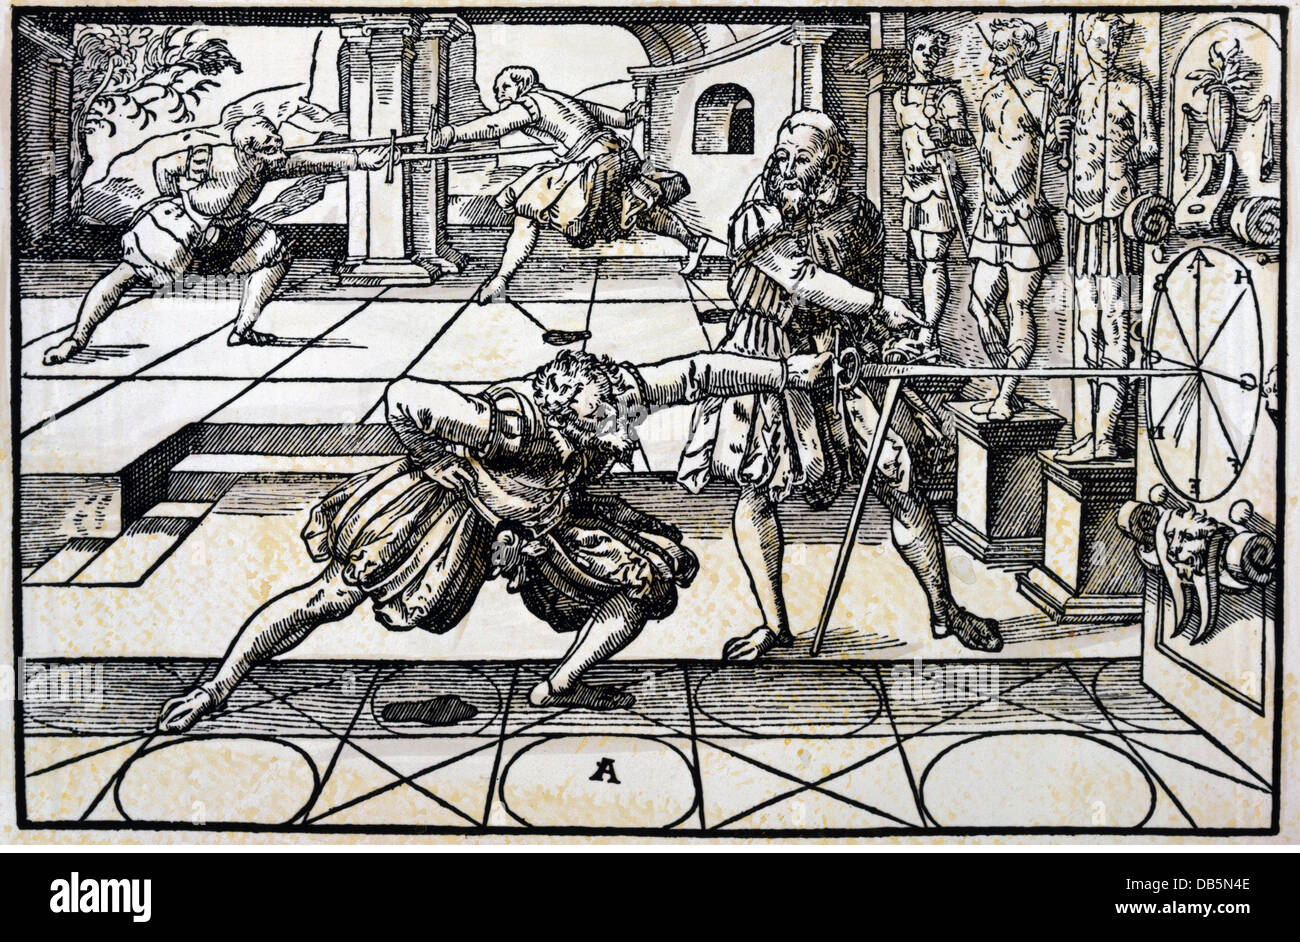 sport, fencing, fencing academy, straight blow on the target plate, back: parade and riposte, woodcut, Germany, late 17th century, swordsmanship, swordsmen, swordsman, fencer, fencers, teacher, master, school, weapons, arms, rapier, nobility, historic, historical, people, Additional-Rights-Clearences-Not Available Stock Photo